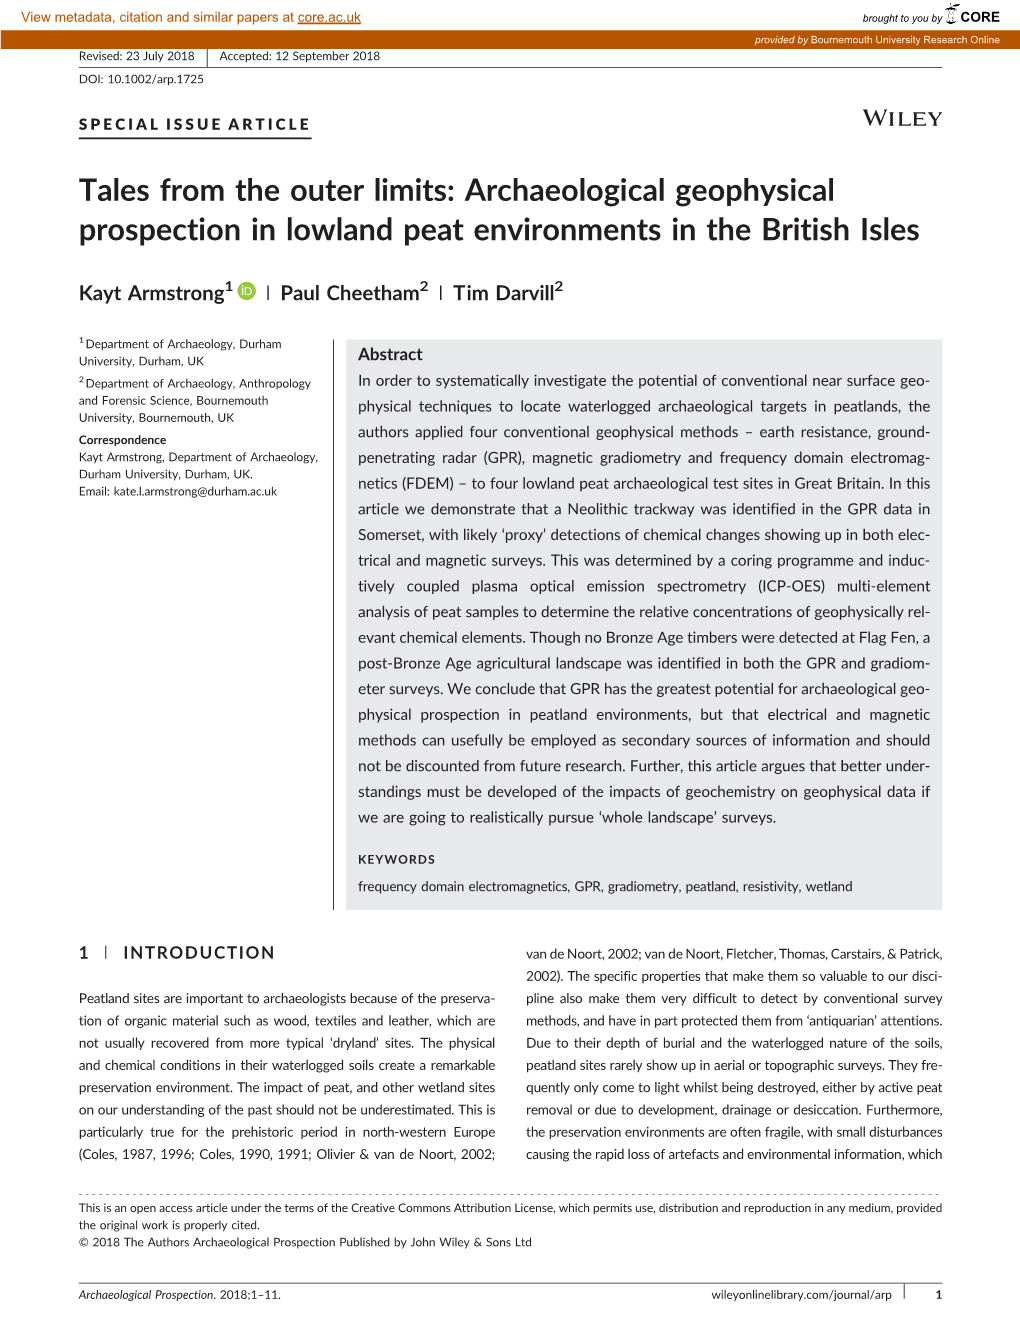 Archaeological Geophysical Prospection in Lowland Peat Environments in the British Isles